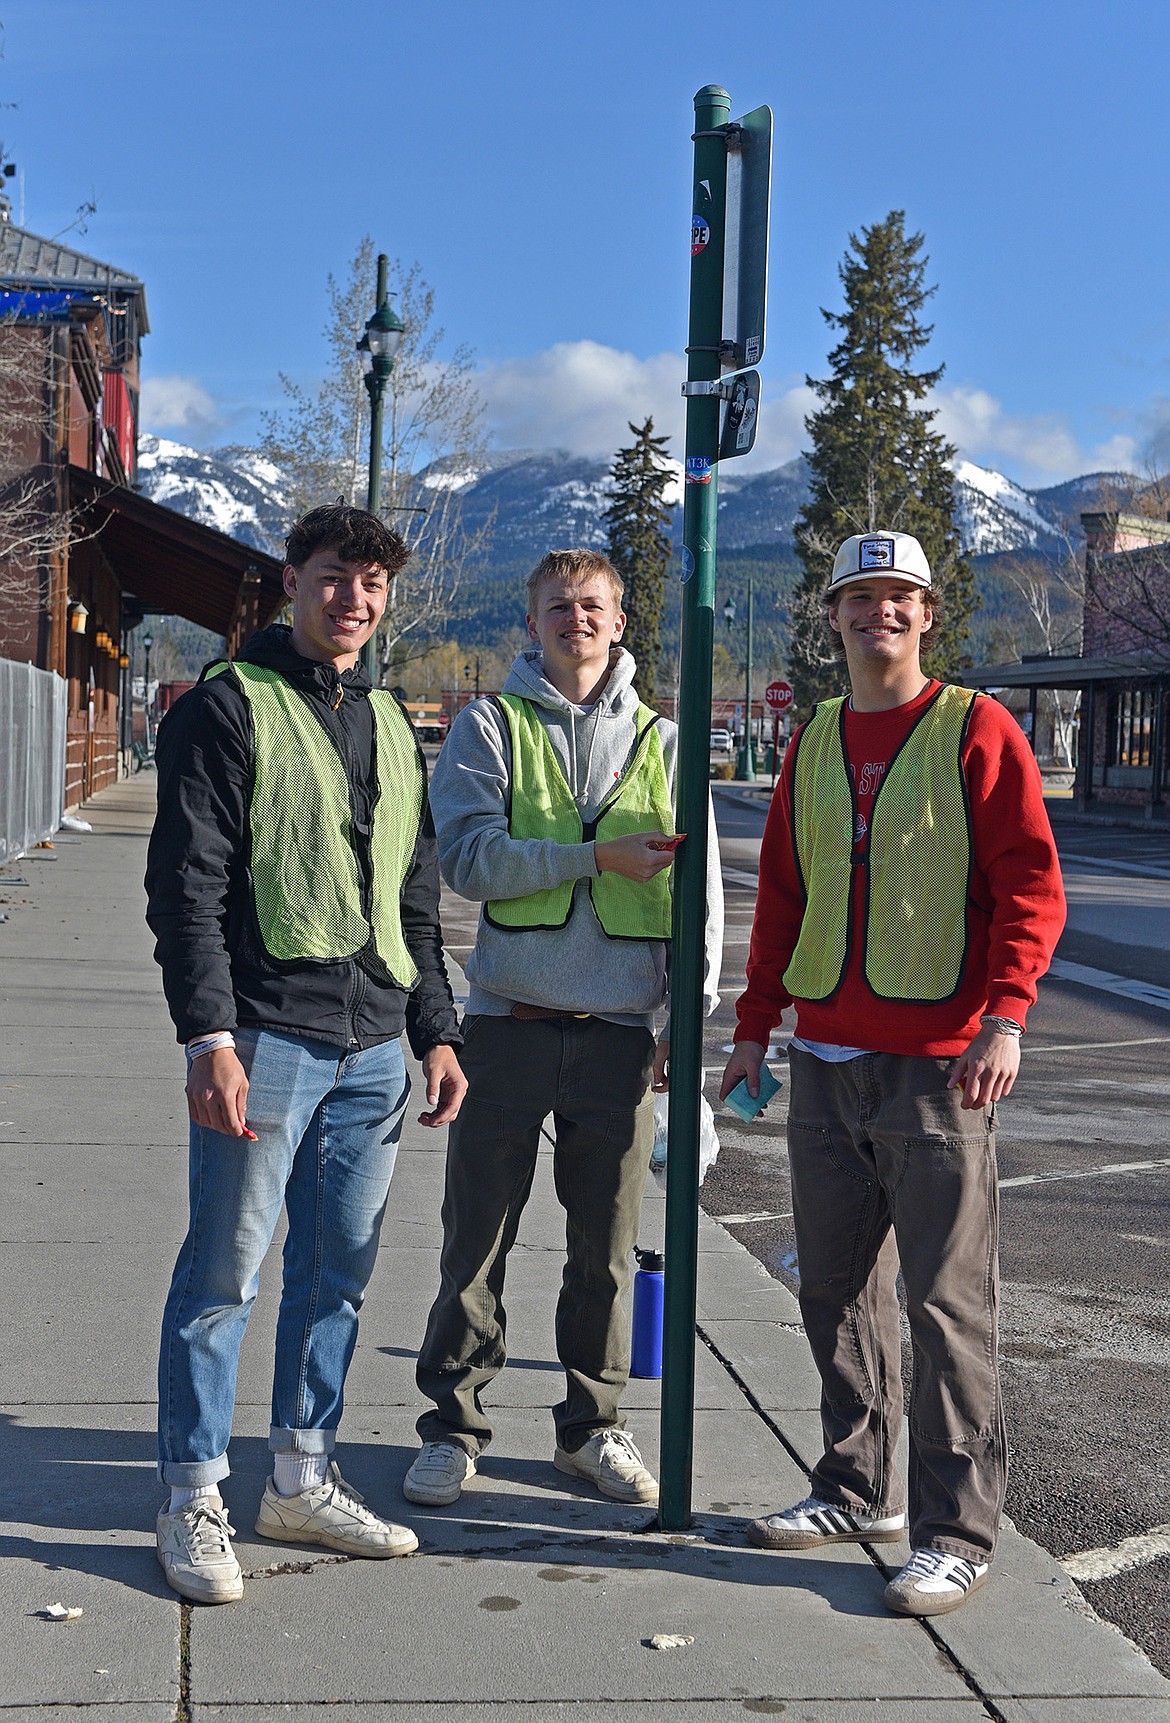 Ryder Barinowski, Buren Brust and Mason Genovese helped to remove stickers downtown along with nearly 90 other Whitefish high school seniors last week. (Julie Engler/Whitefish Pilot)